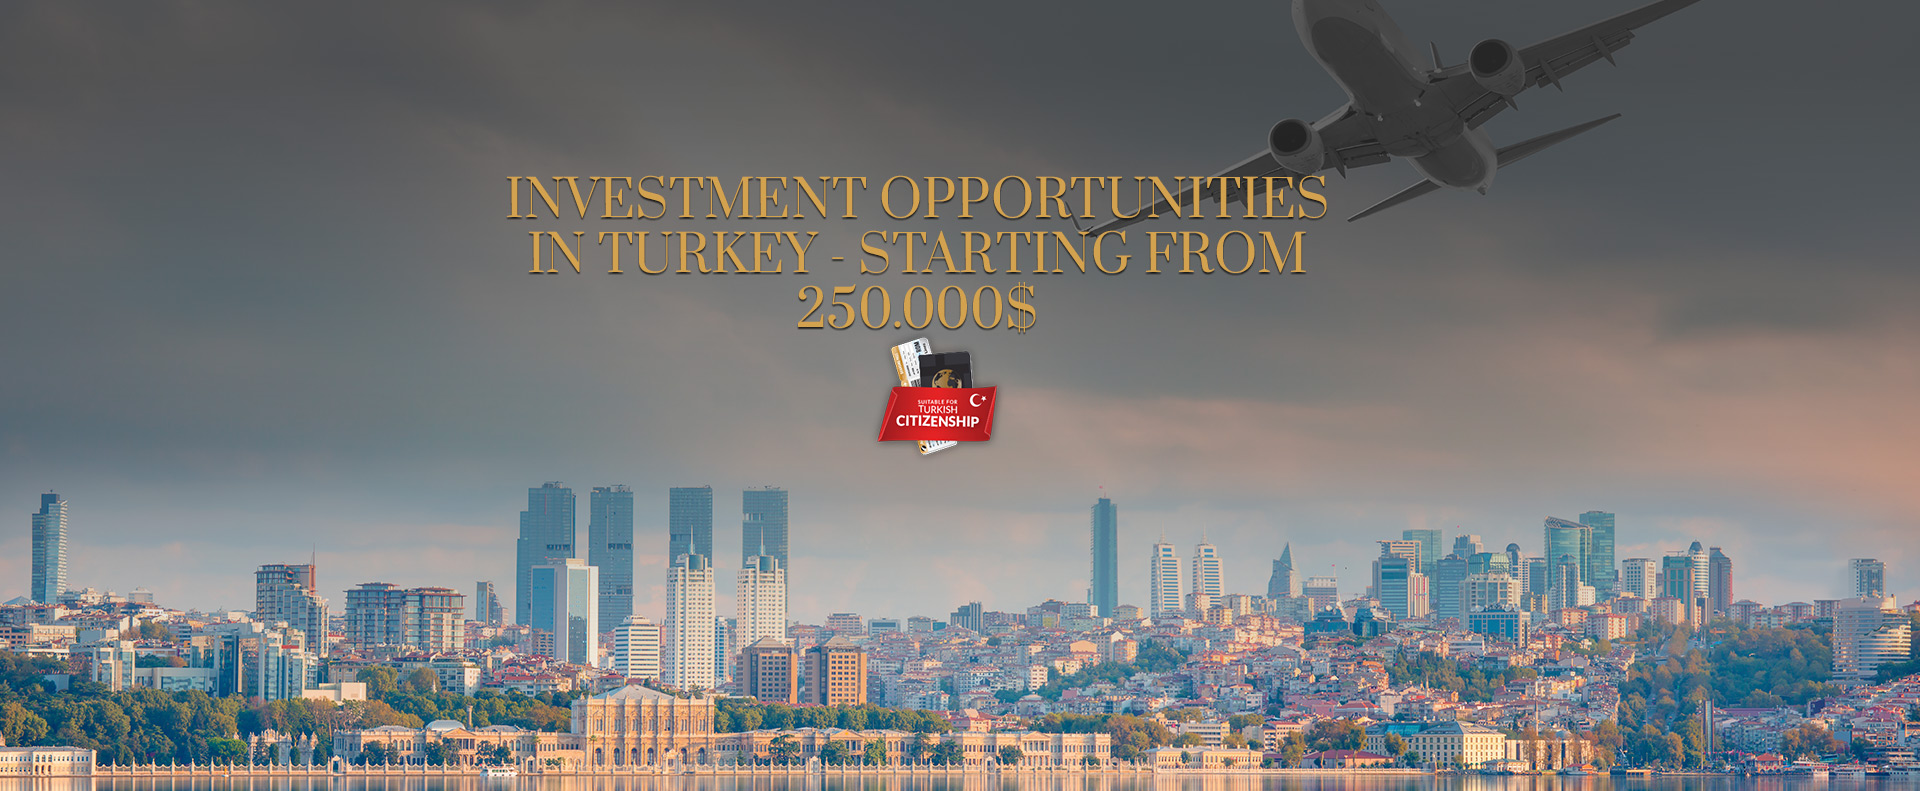 INVESTMENT-OPPORTUNITIES-TURKEY-STARTING-FROM-250.000